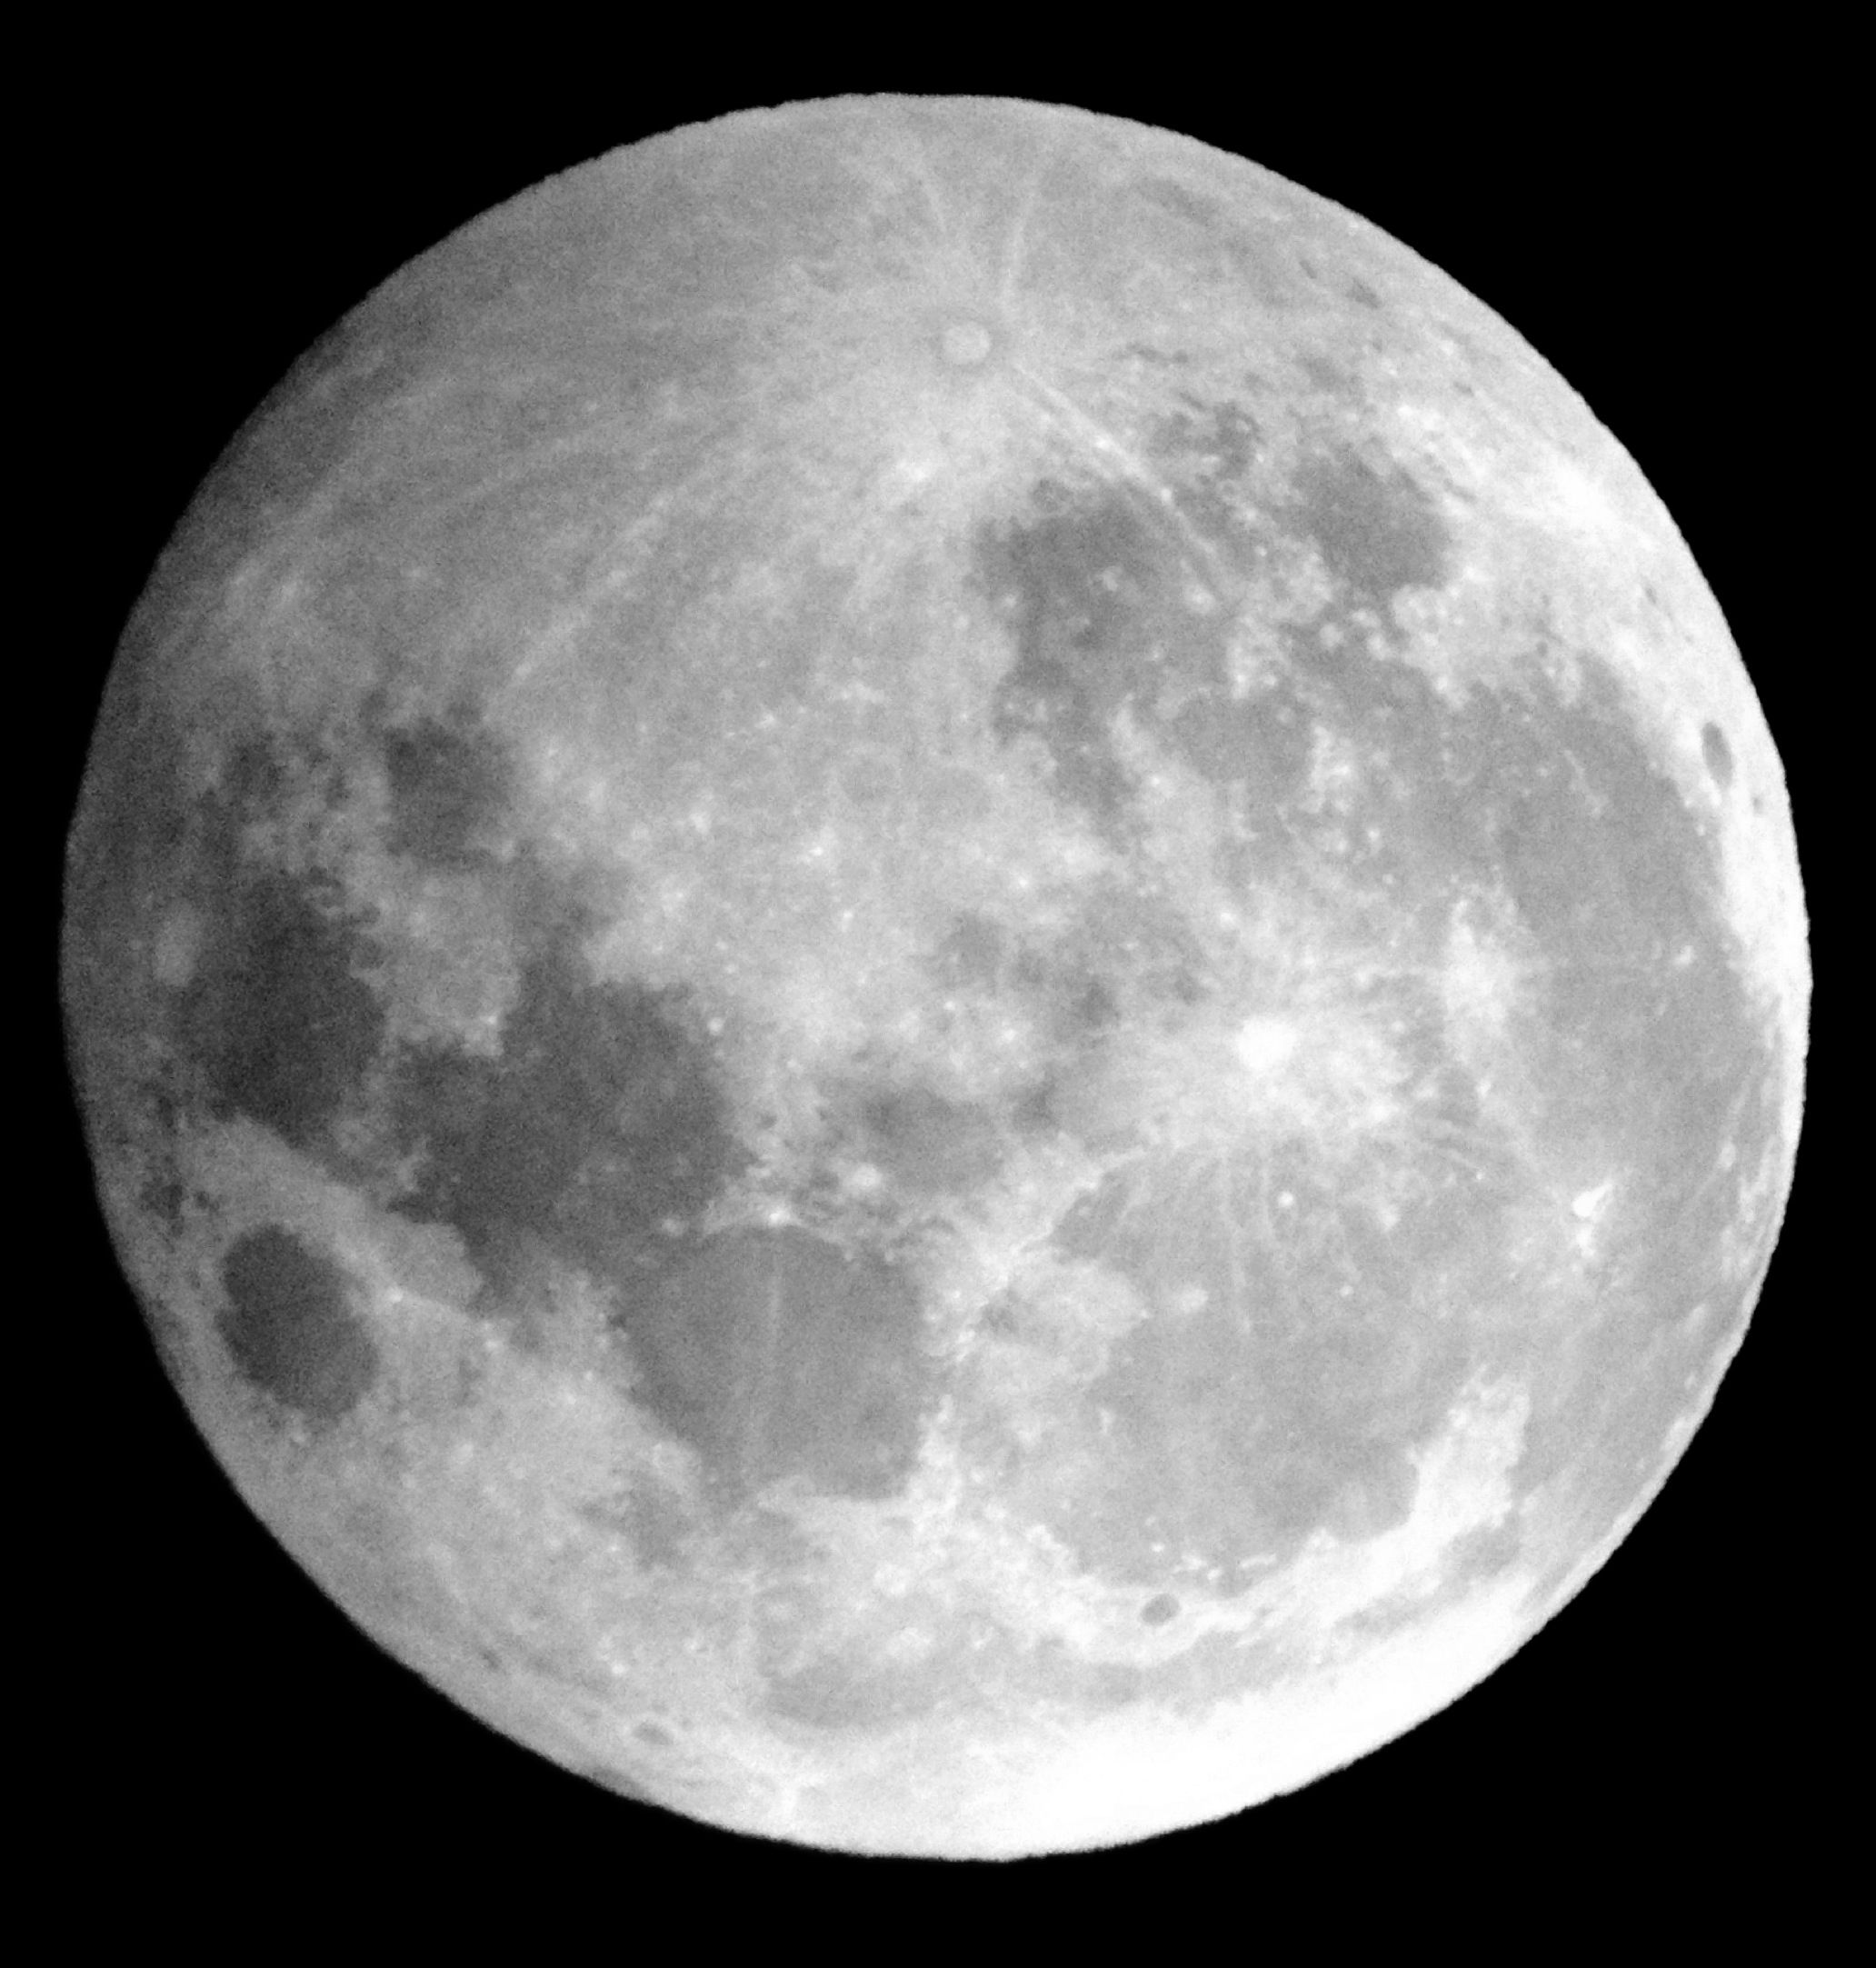 Super Moon Astronomy Images at Orion Telescopes